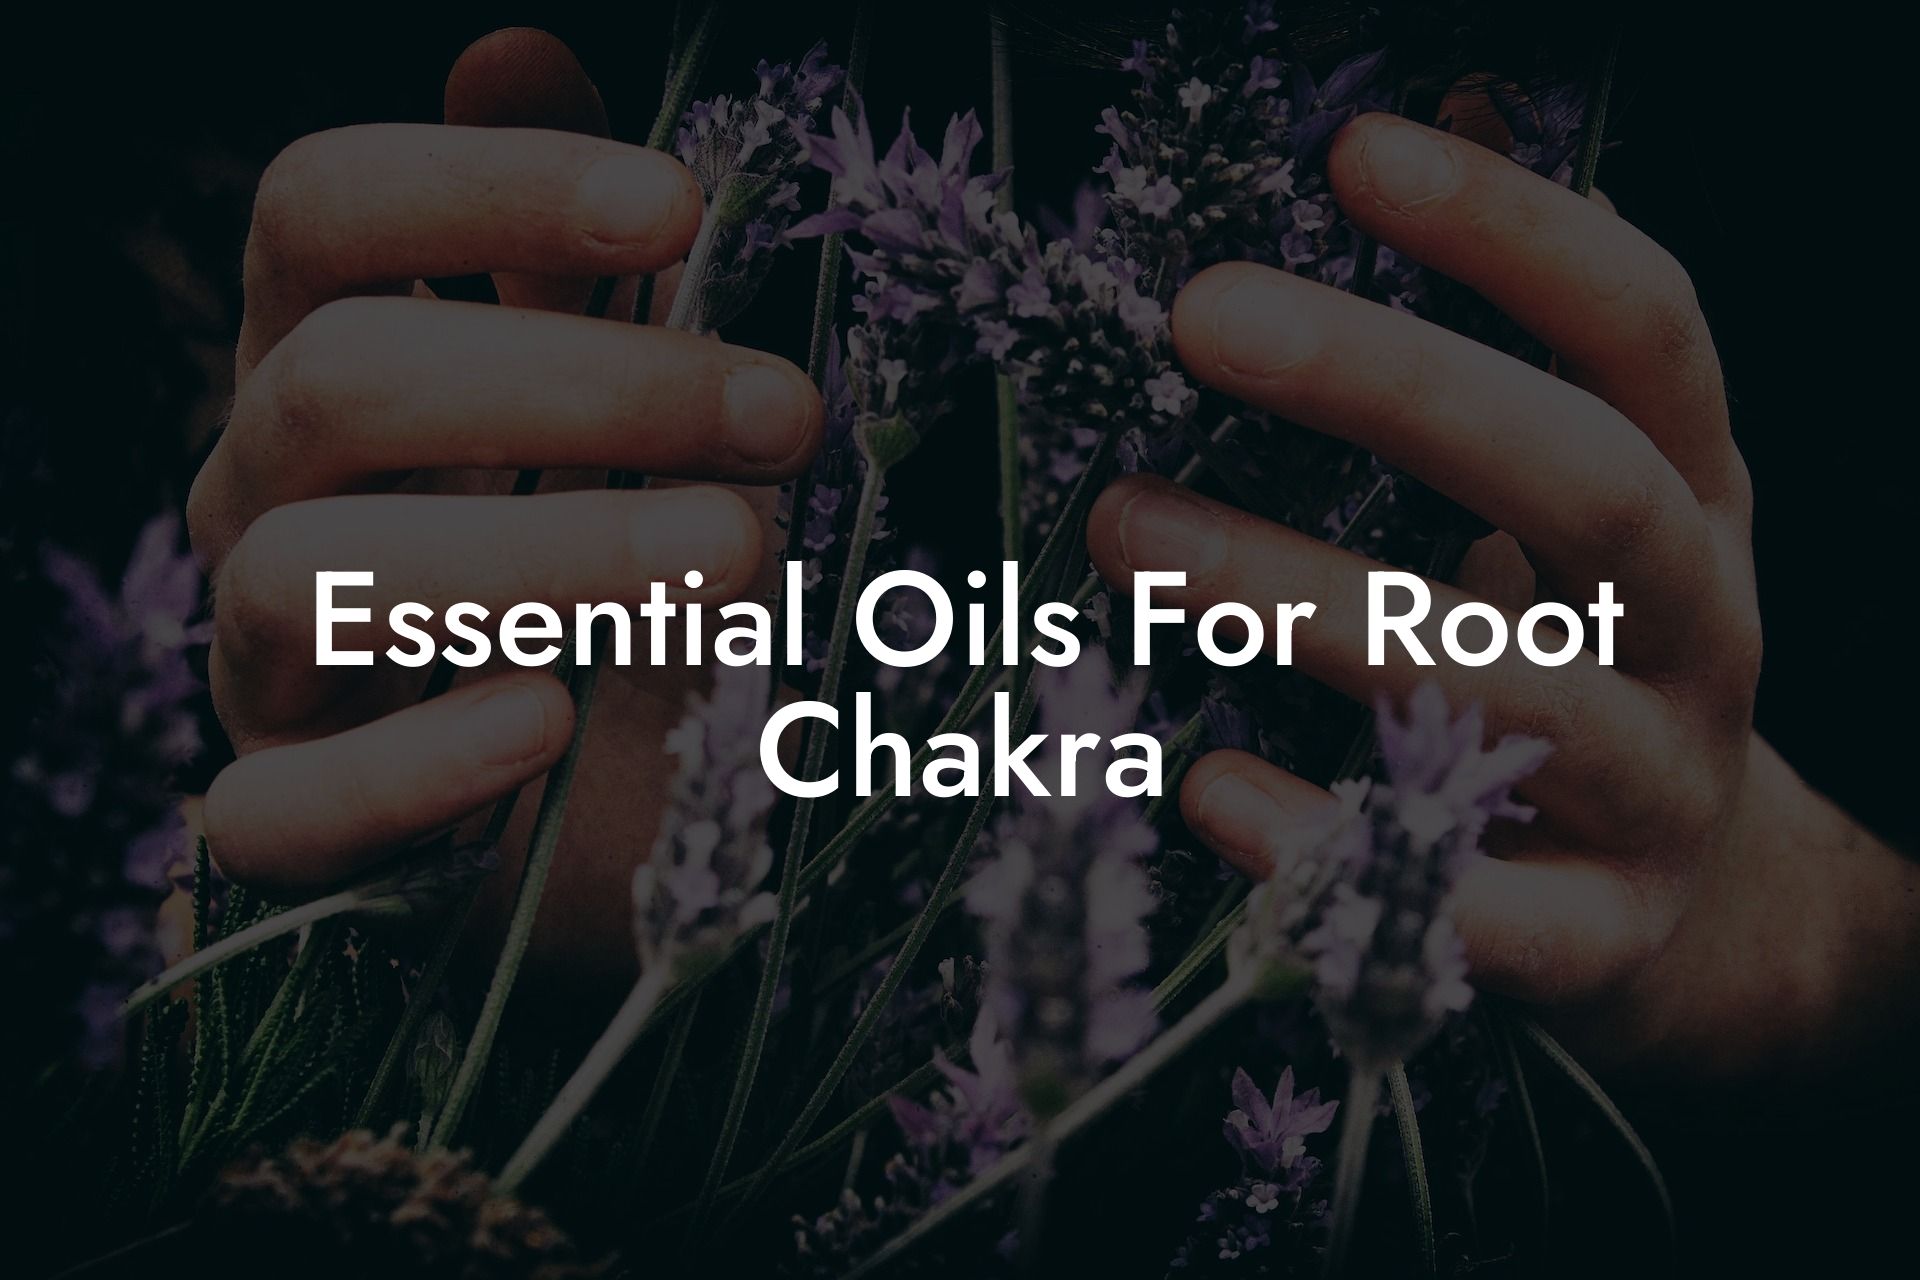 Essential Oils For Root Chakra